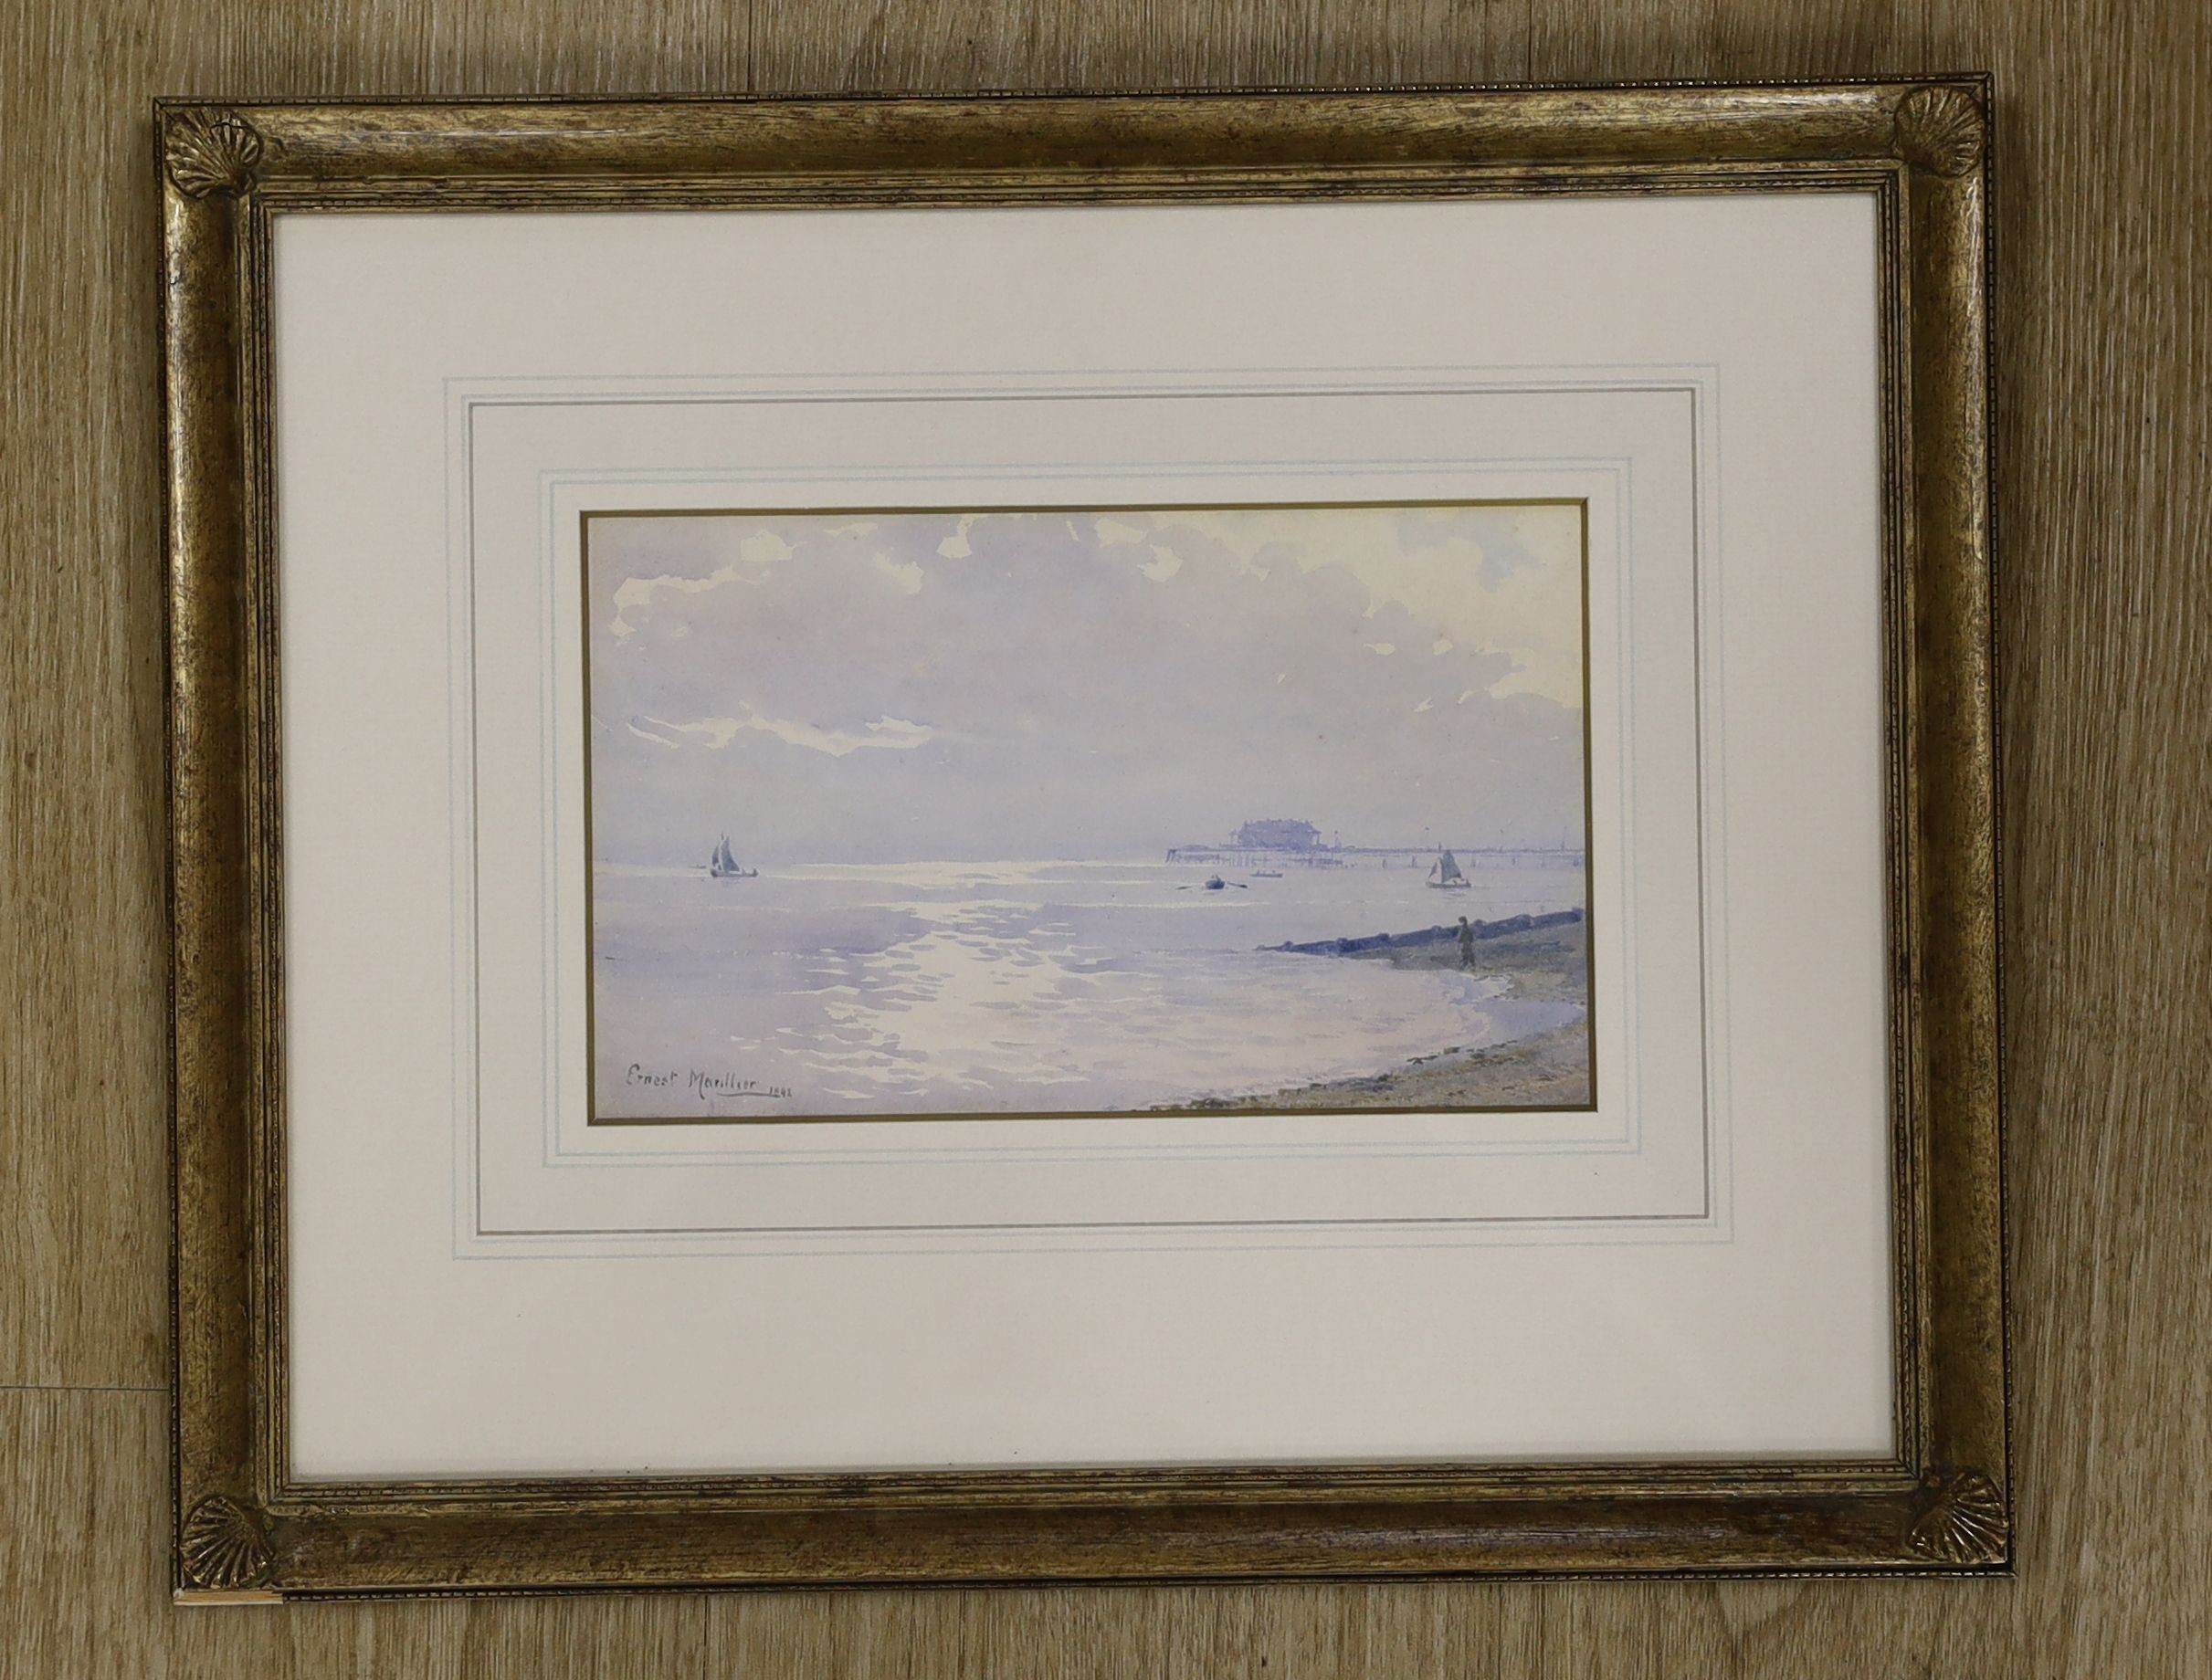 Ernest Marillier (19th/20th C.), watercolour, 'A February evening, Hastings', signed and dated 1892, 13.5 x 22.5cm